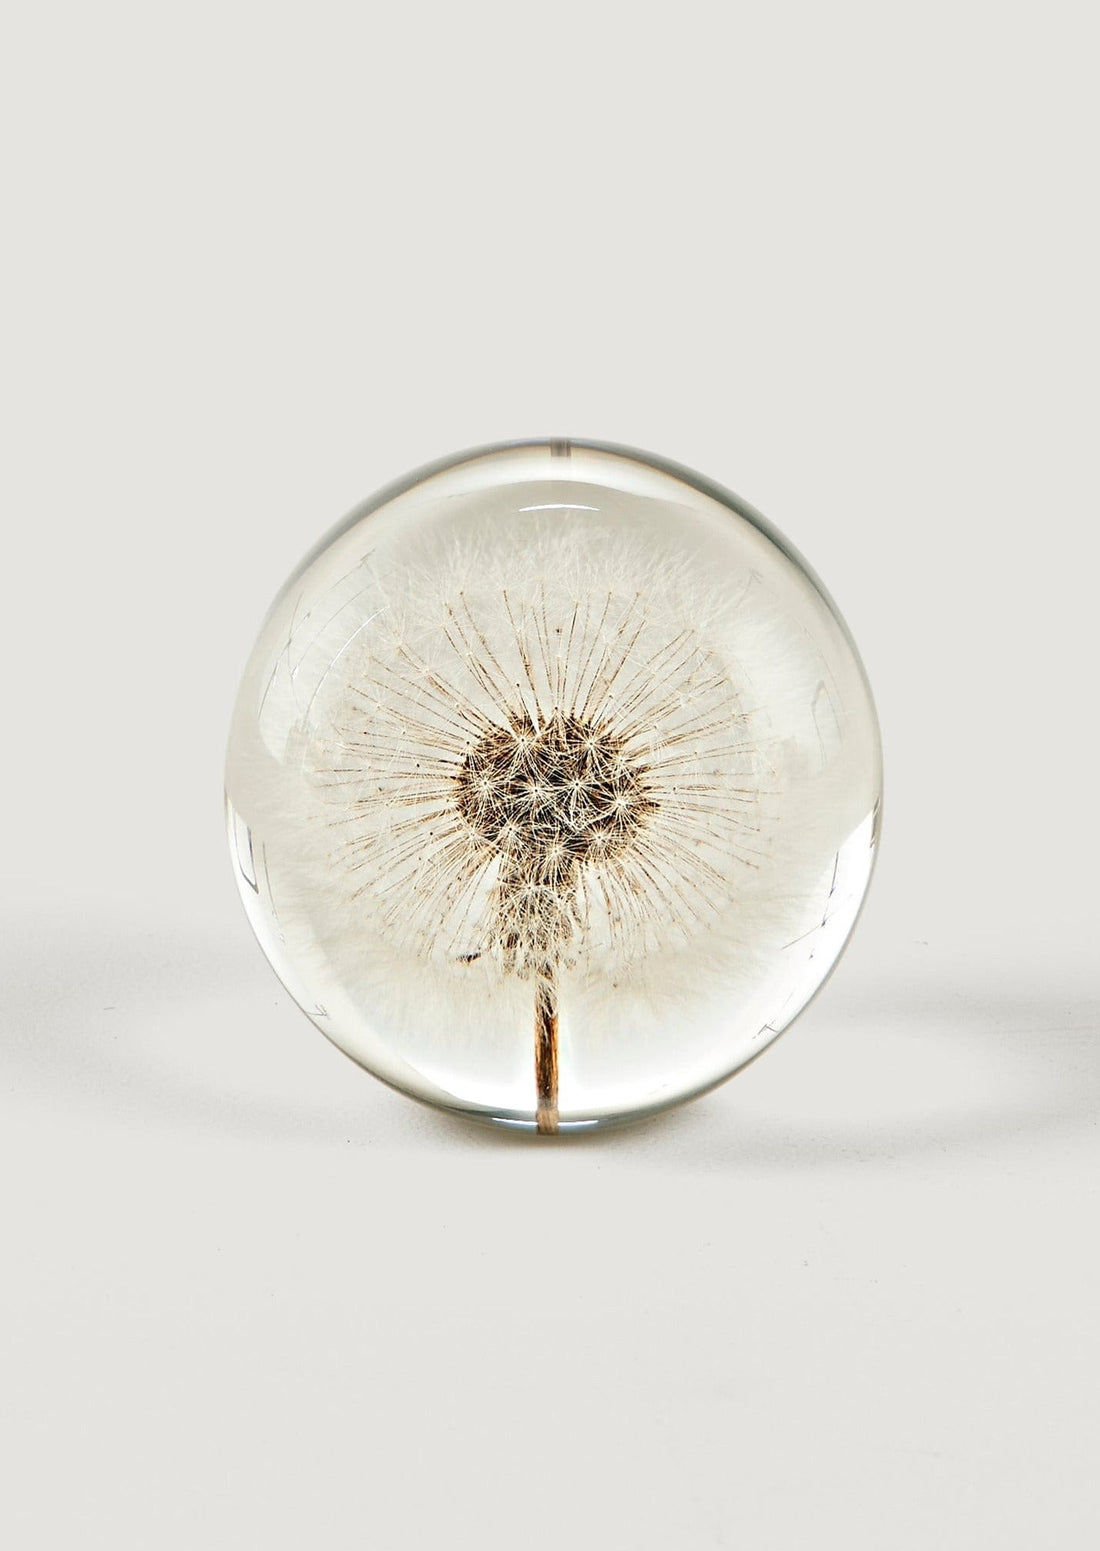 Afloral Decor Resin Ball Paperweight with Preserved Dandelion Head